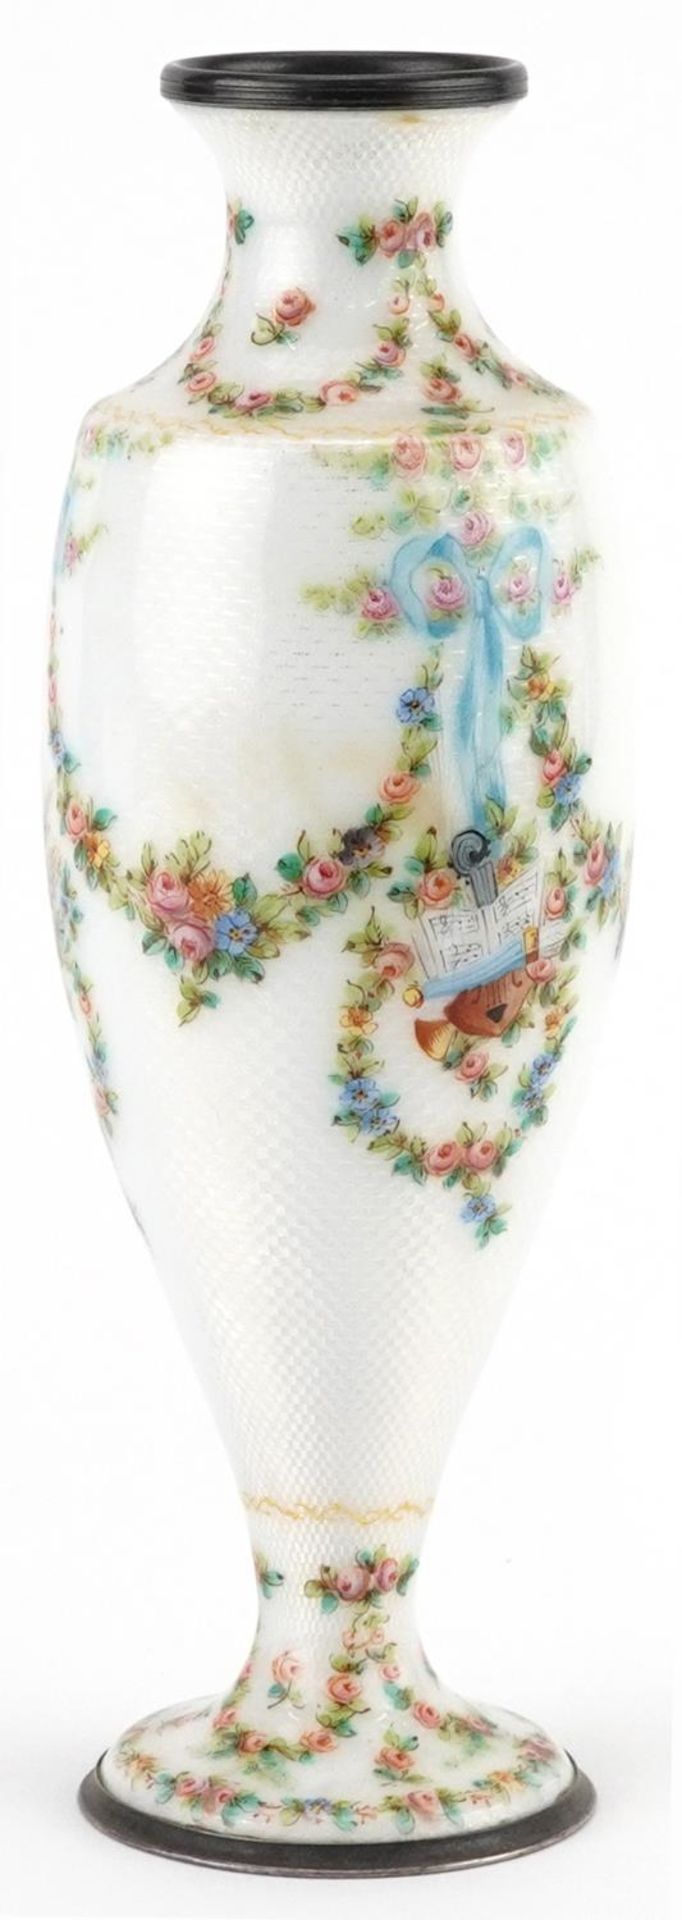 19th century French silver and white guilloche enamel vase finely hand painted with swags, ribbons - Image 6 of 10